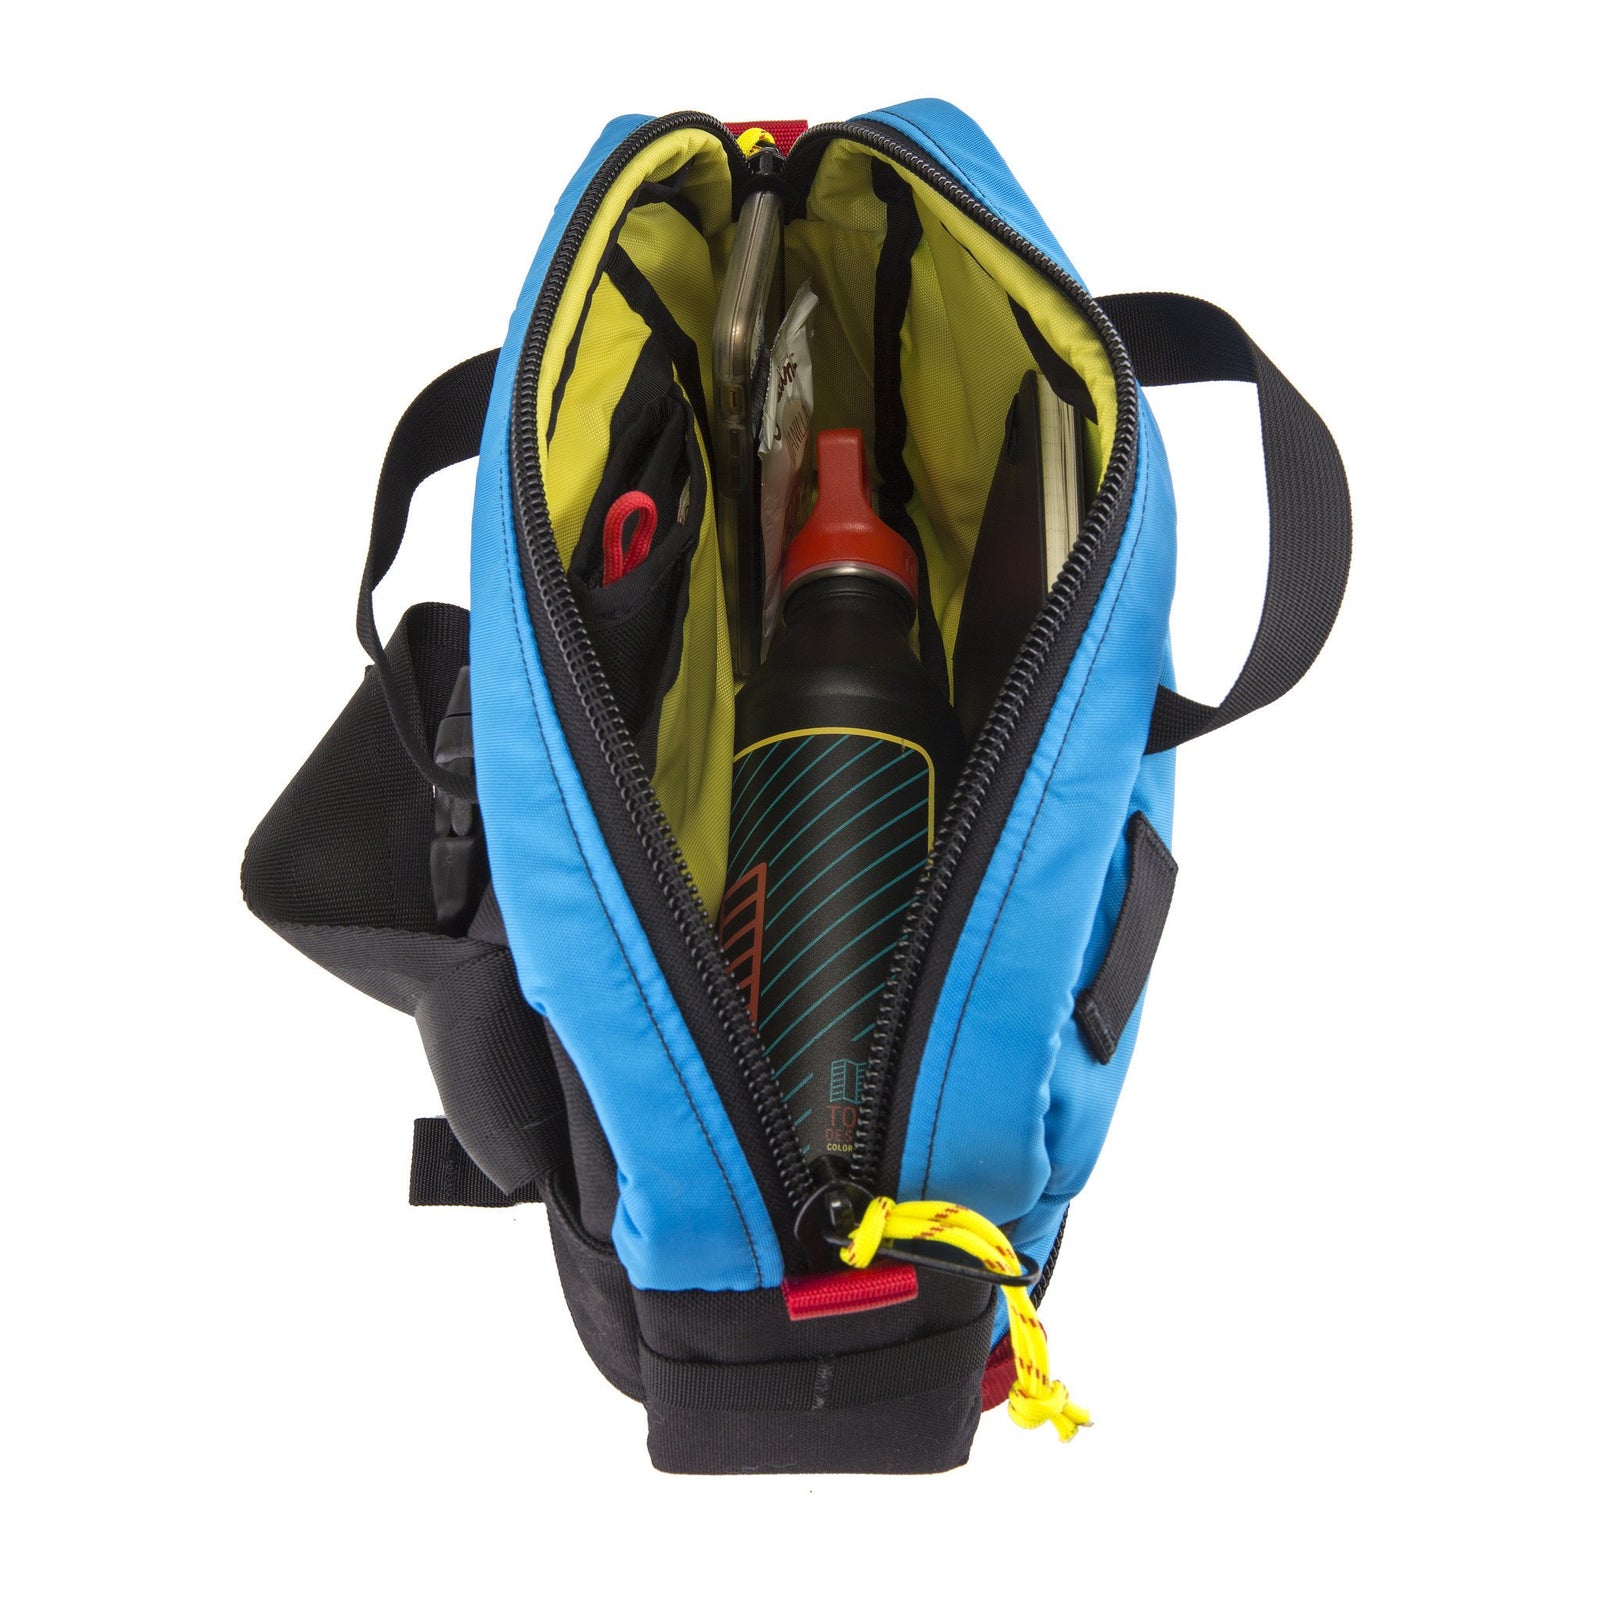 General top shot of Topo Designs Quick Pack in Blue showing full open main compartment and yellow lining.